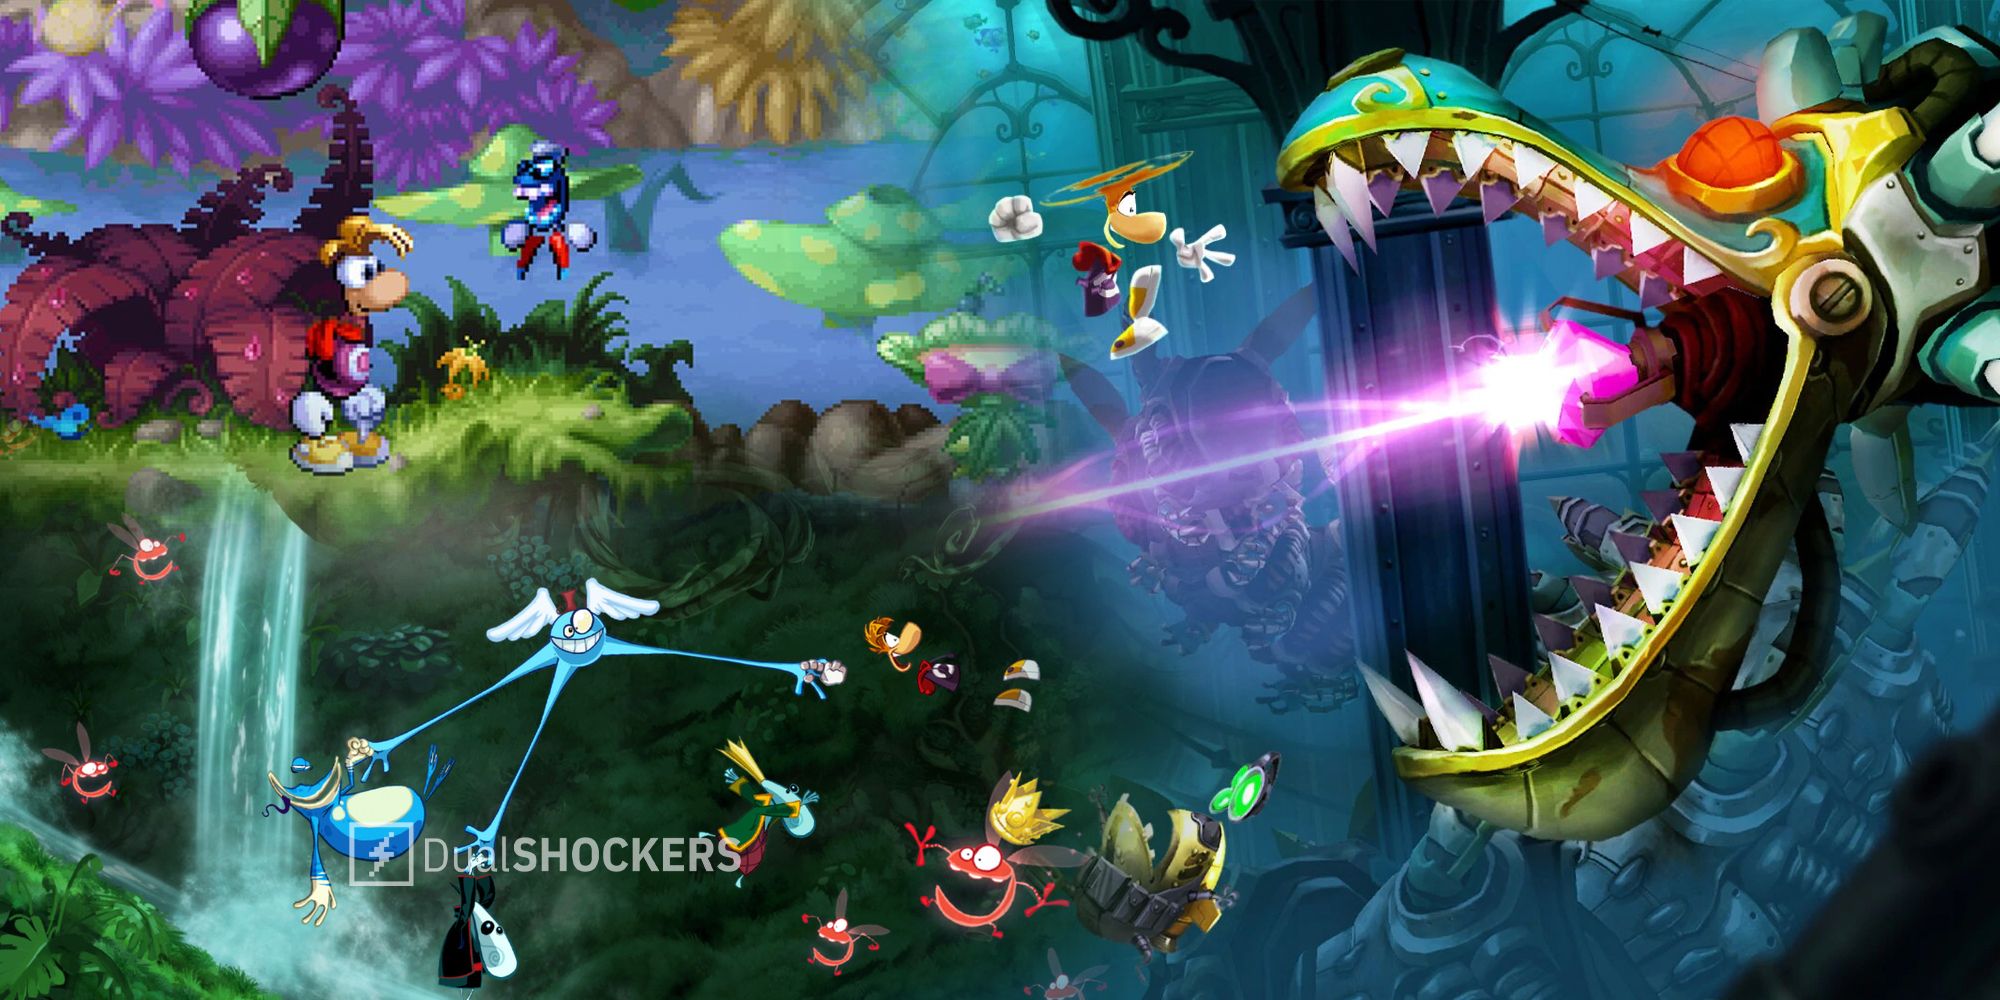 There's a new Rayman game in development, but don't get excited